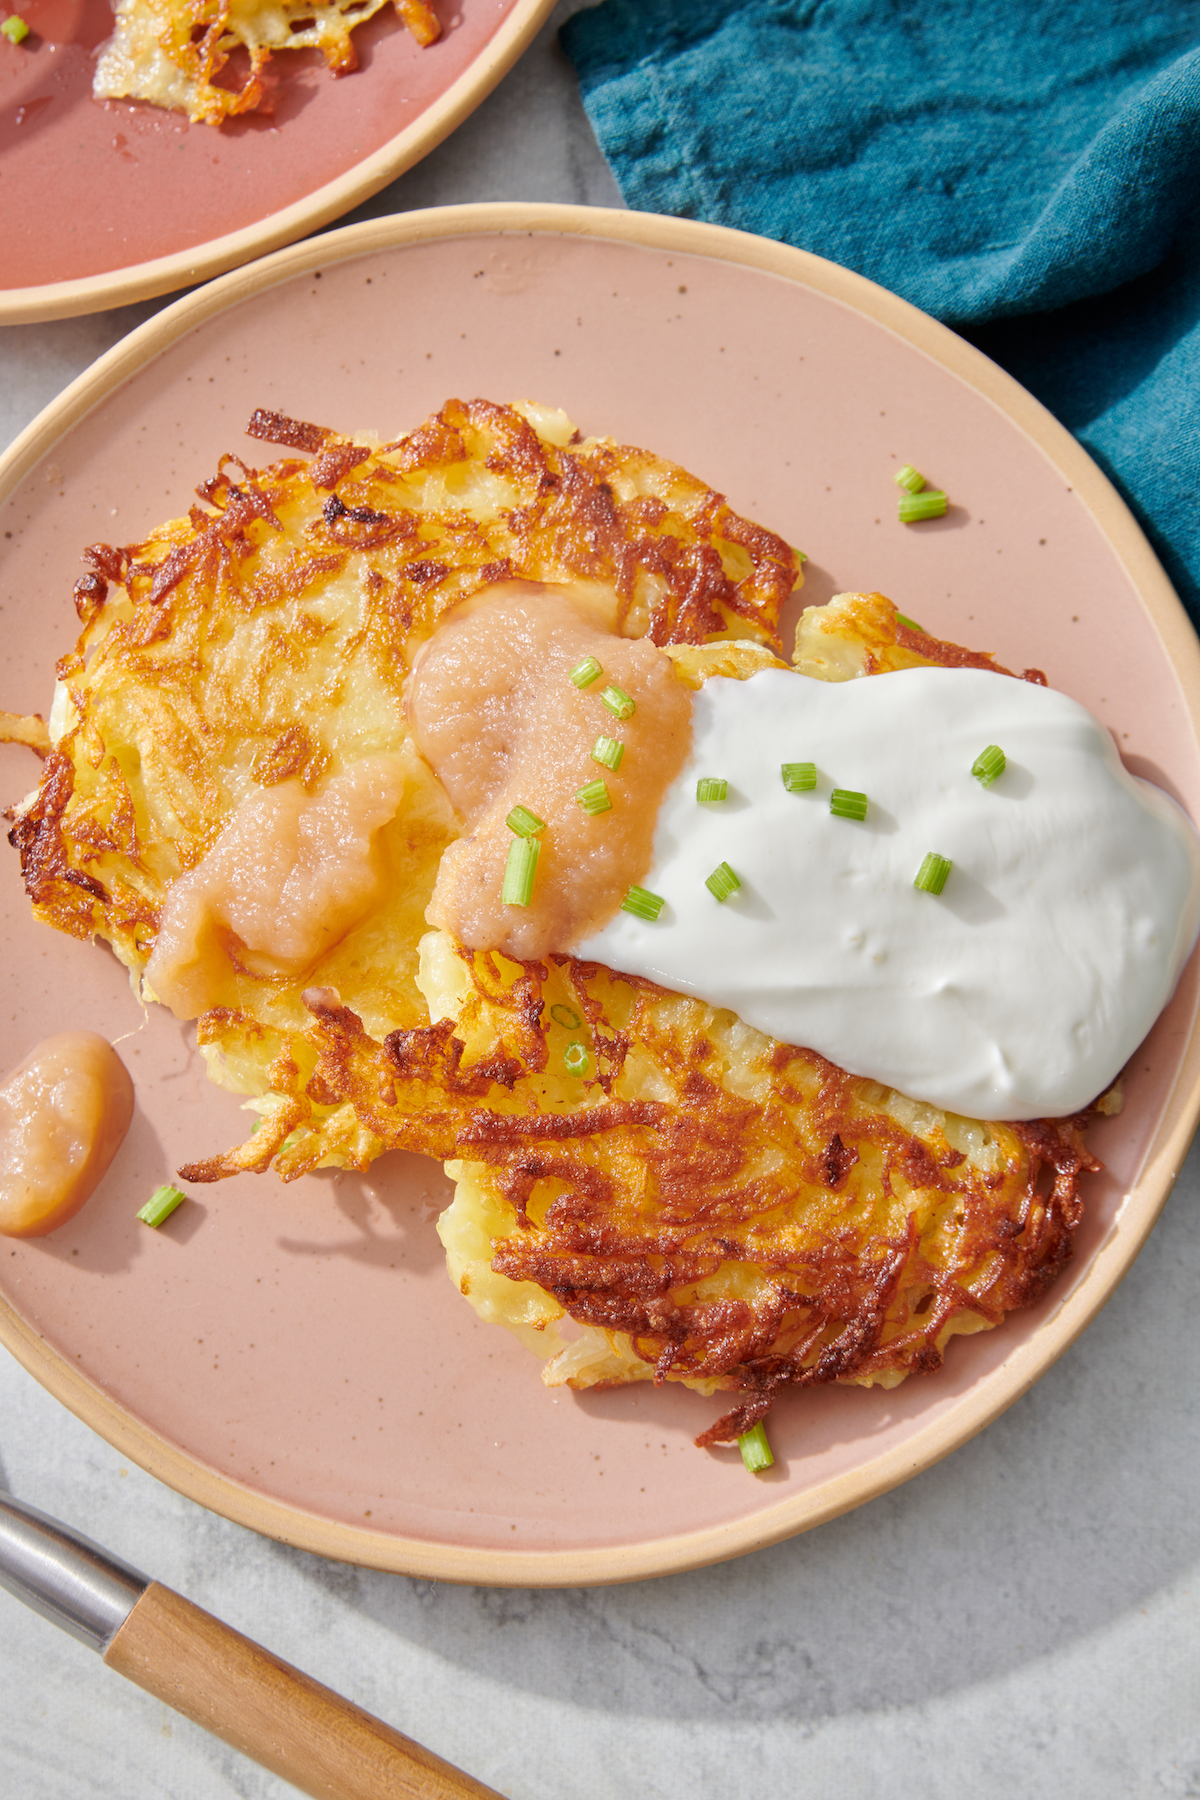 Latke on plate topped with applesauce, sour cream and chives.